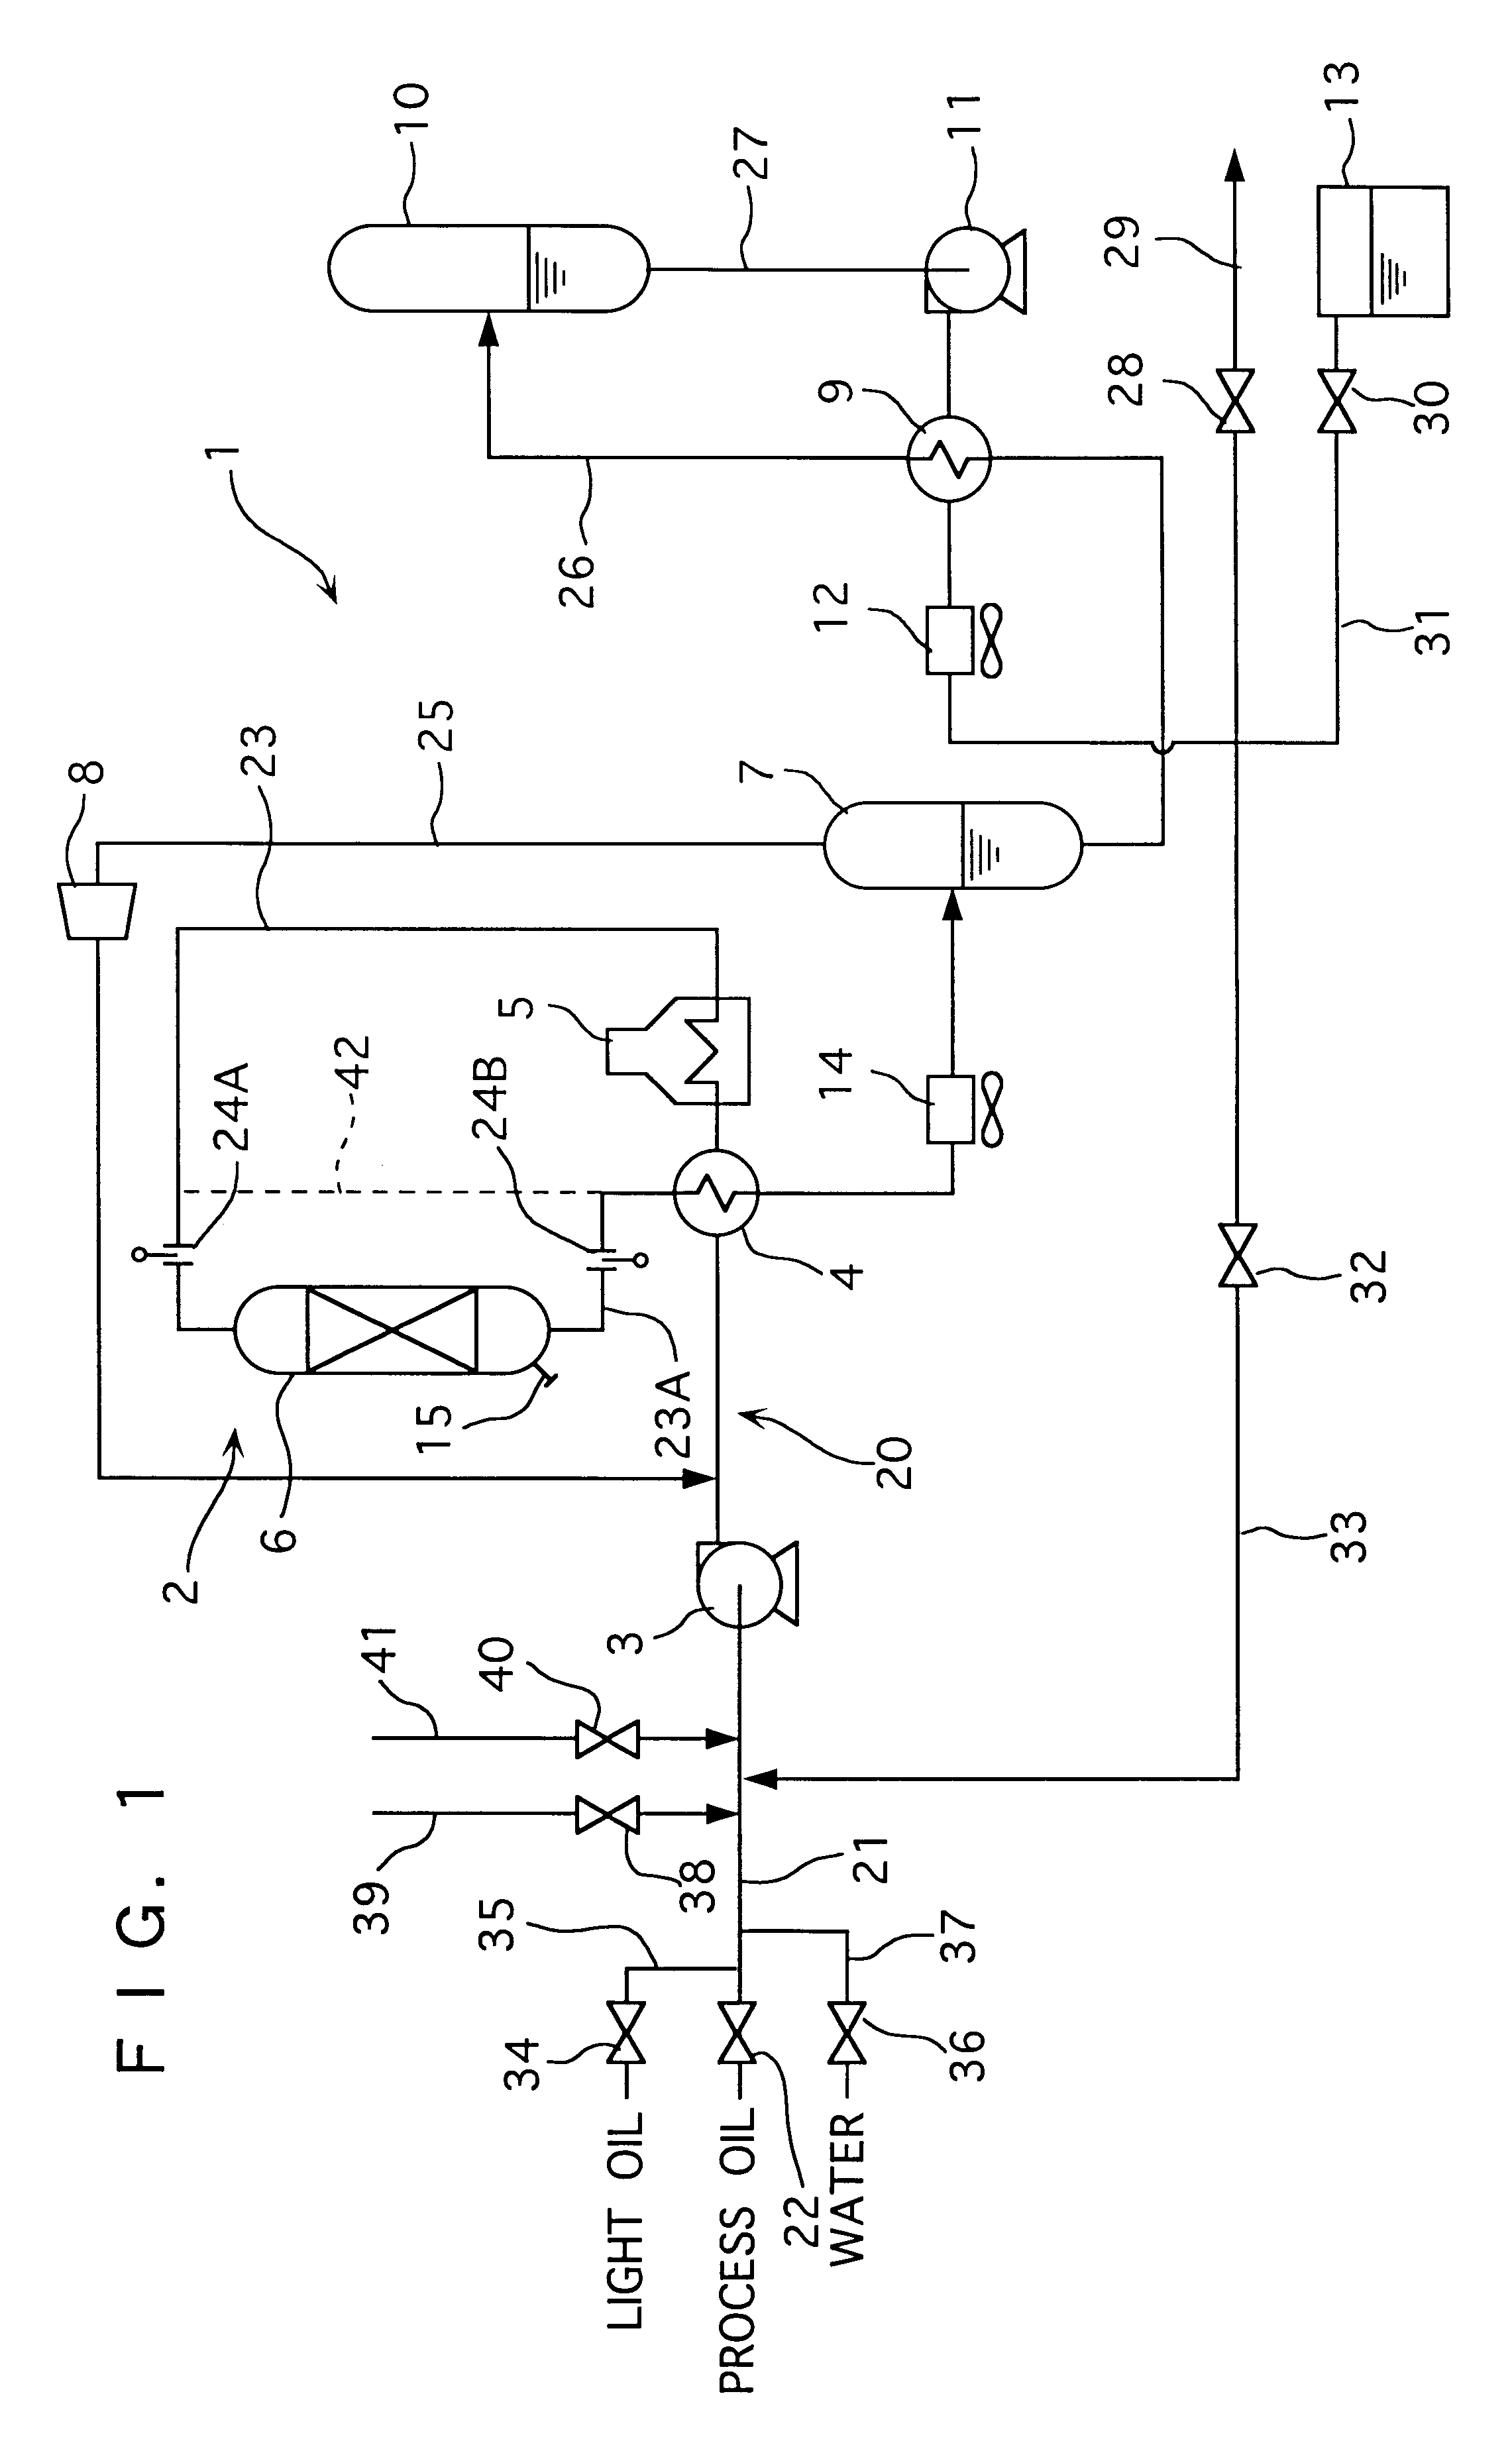 Method of cleaning and maintaining petroleum refining plants